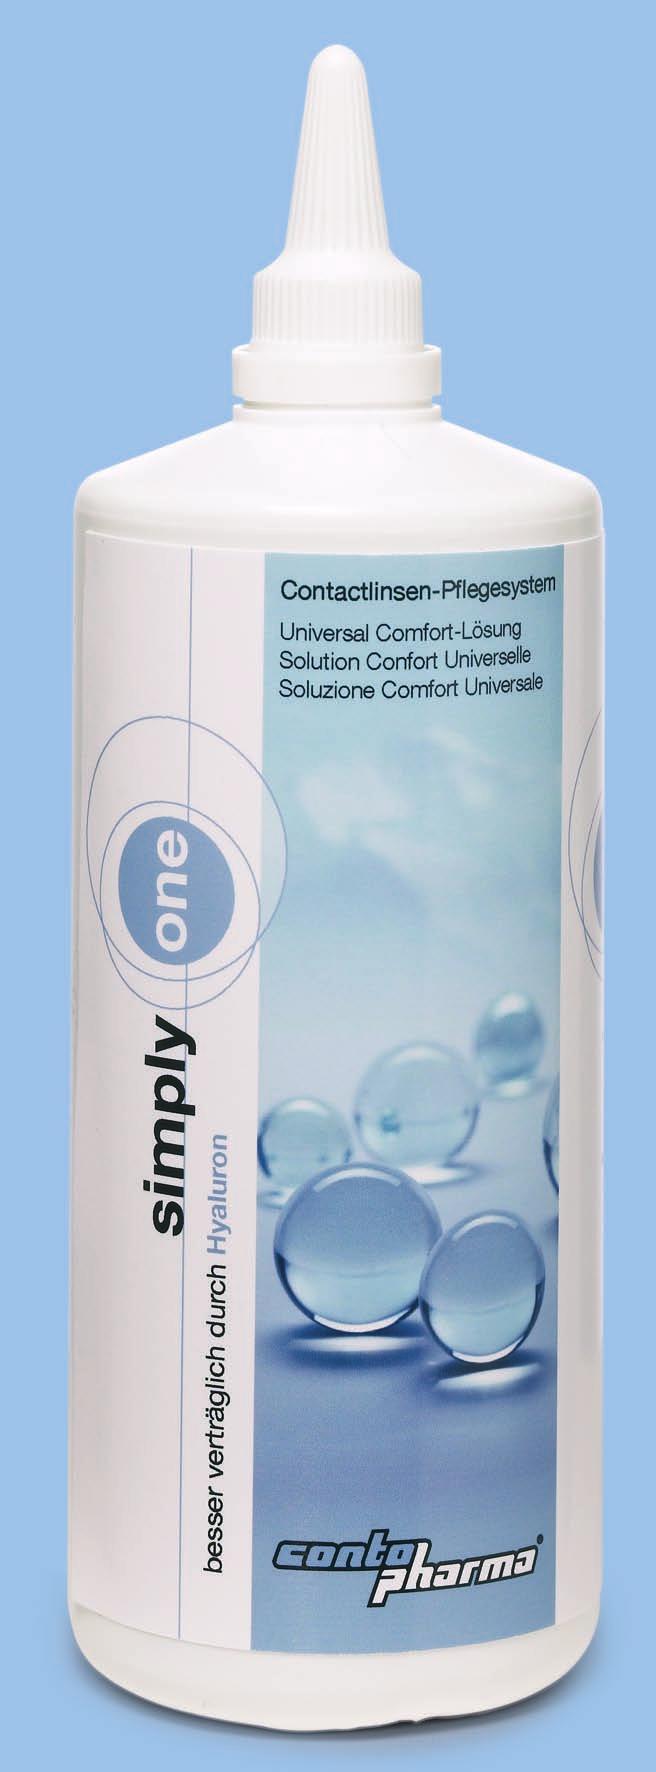 Quite Plainly: Simply One Cleans and Disinfects Efficiently. It is no surprise that a modern contact lens solution like Simply One can clean, disinfect, store, and rinse efficiently.